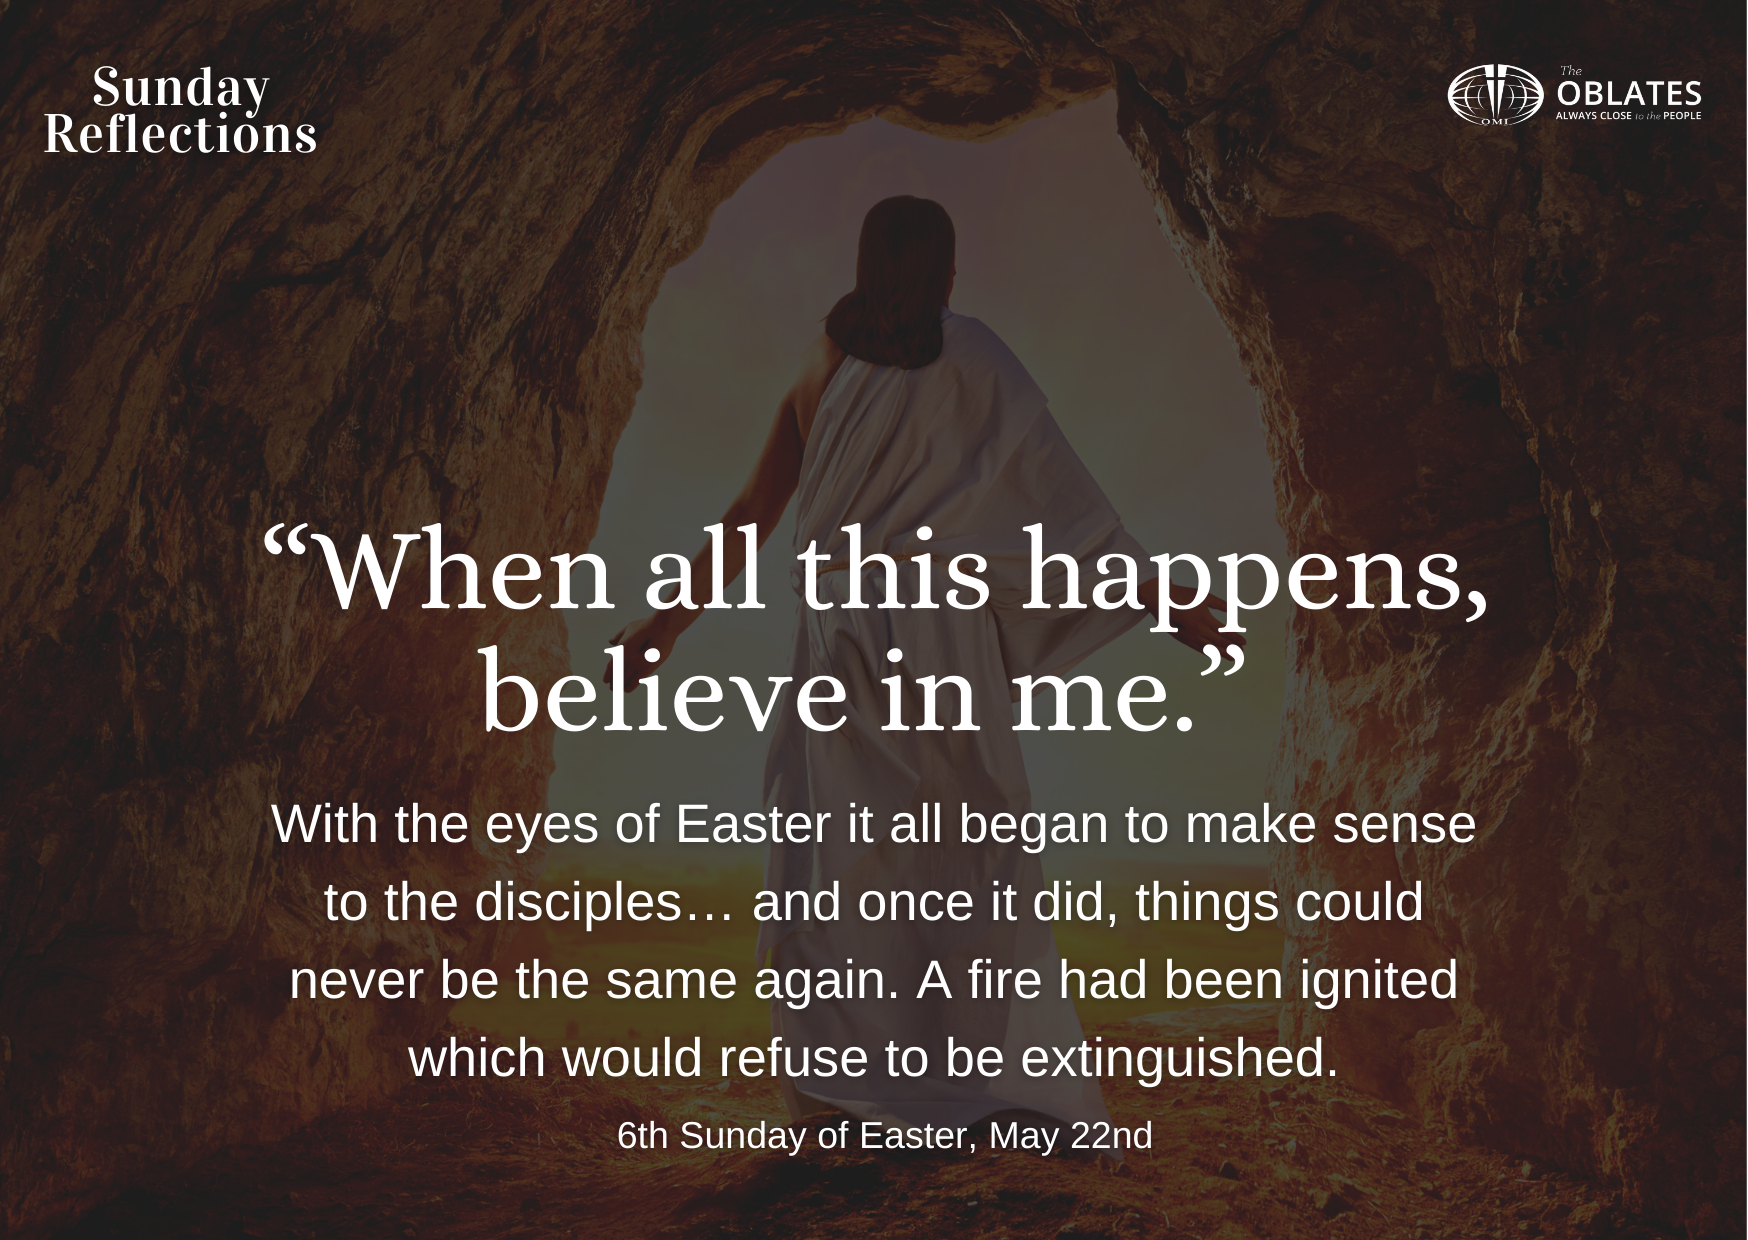 6th Sunday of Easter May 22nd Reflection